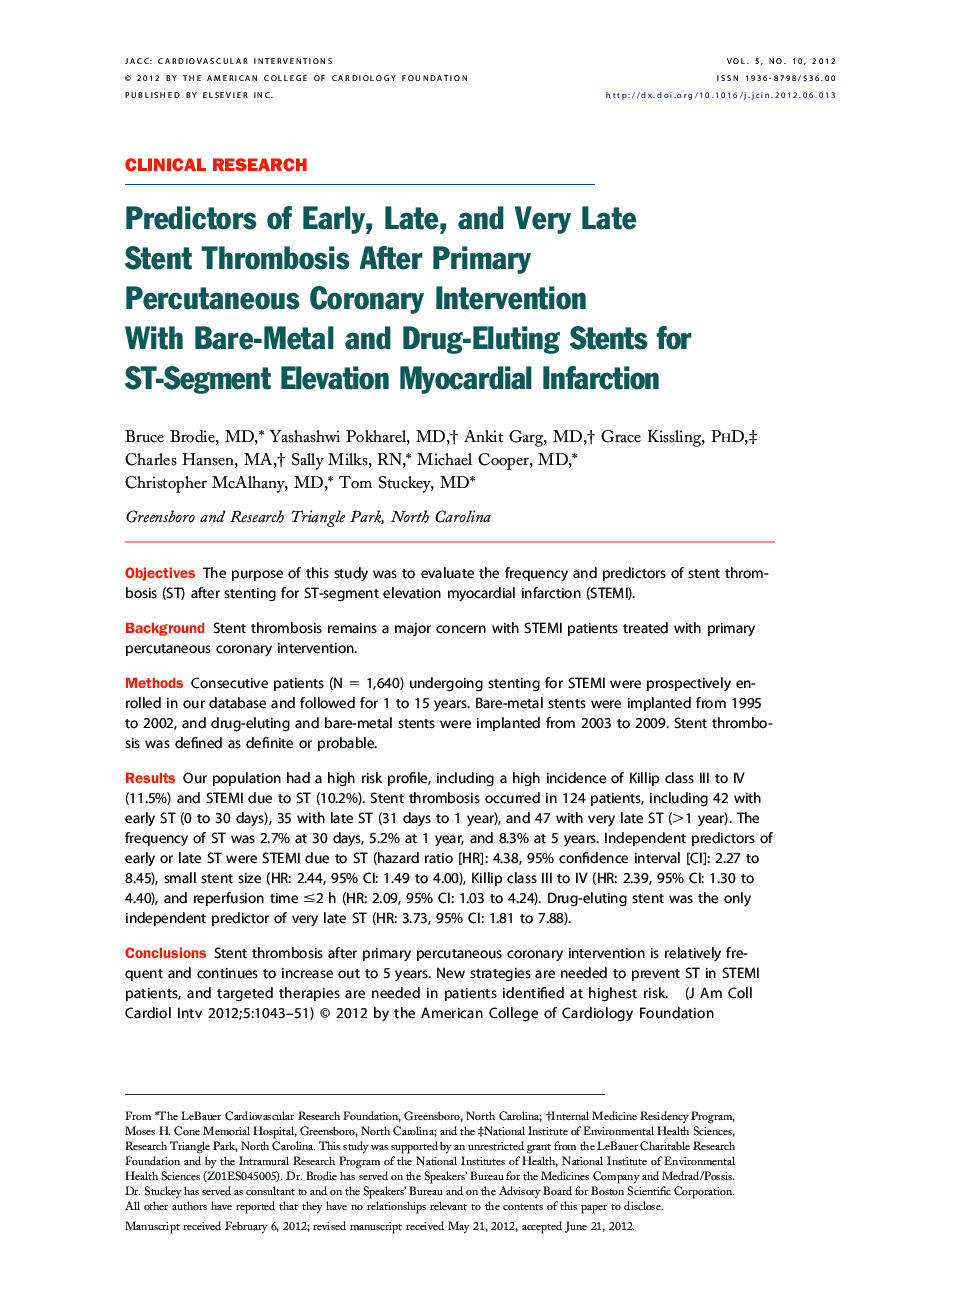 Predictors of Early, Late, and Very Late Stent Thrombosis After Primary Percutaneous Coronary Intervention With Bare-Metal and Drug-Eluting Stents for ST-Segment Elevation Myocardial Infarction 